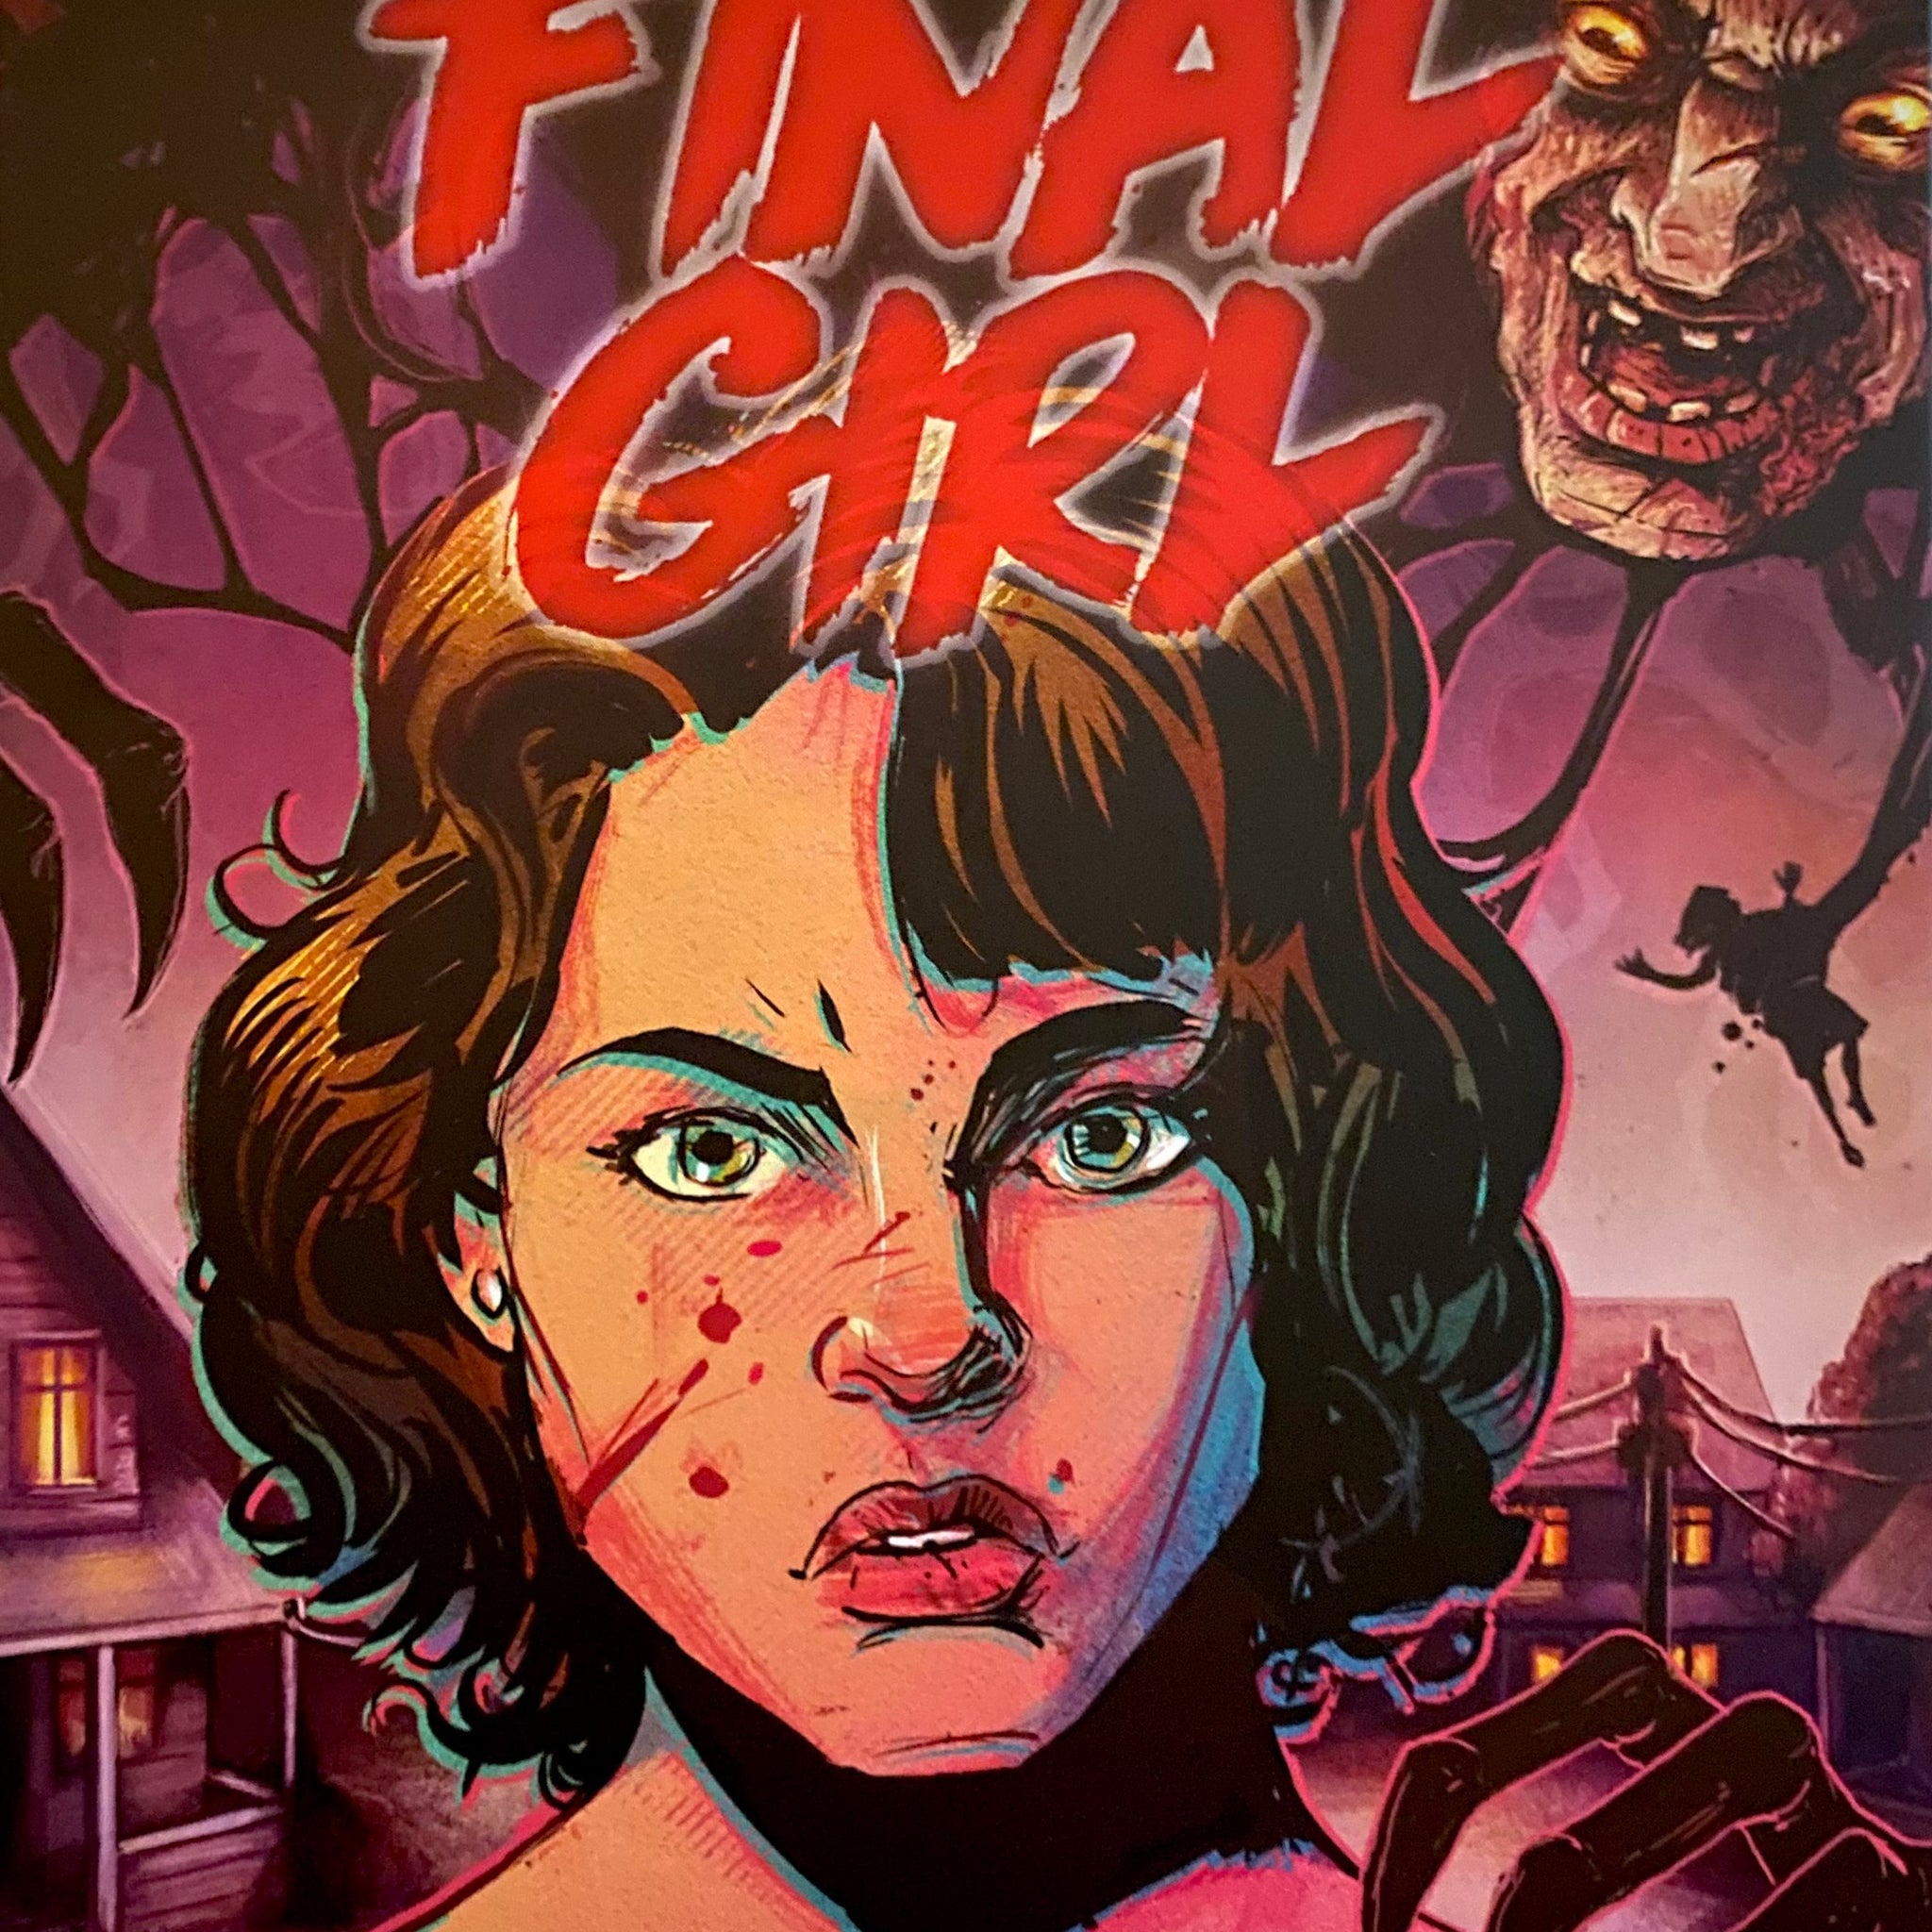 Final Girl: Frightmare on Maple Lane Feature Film